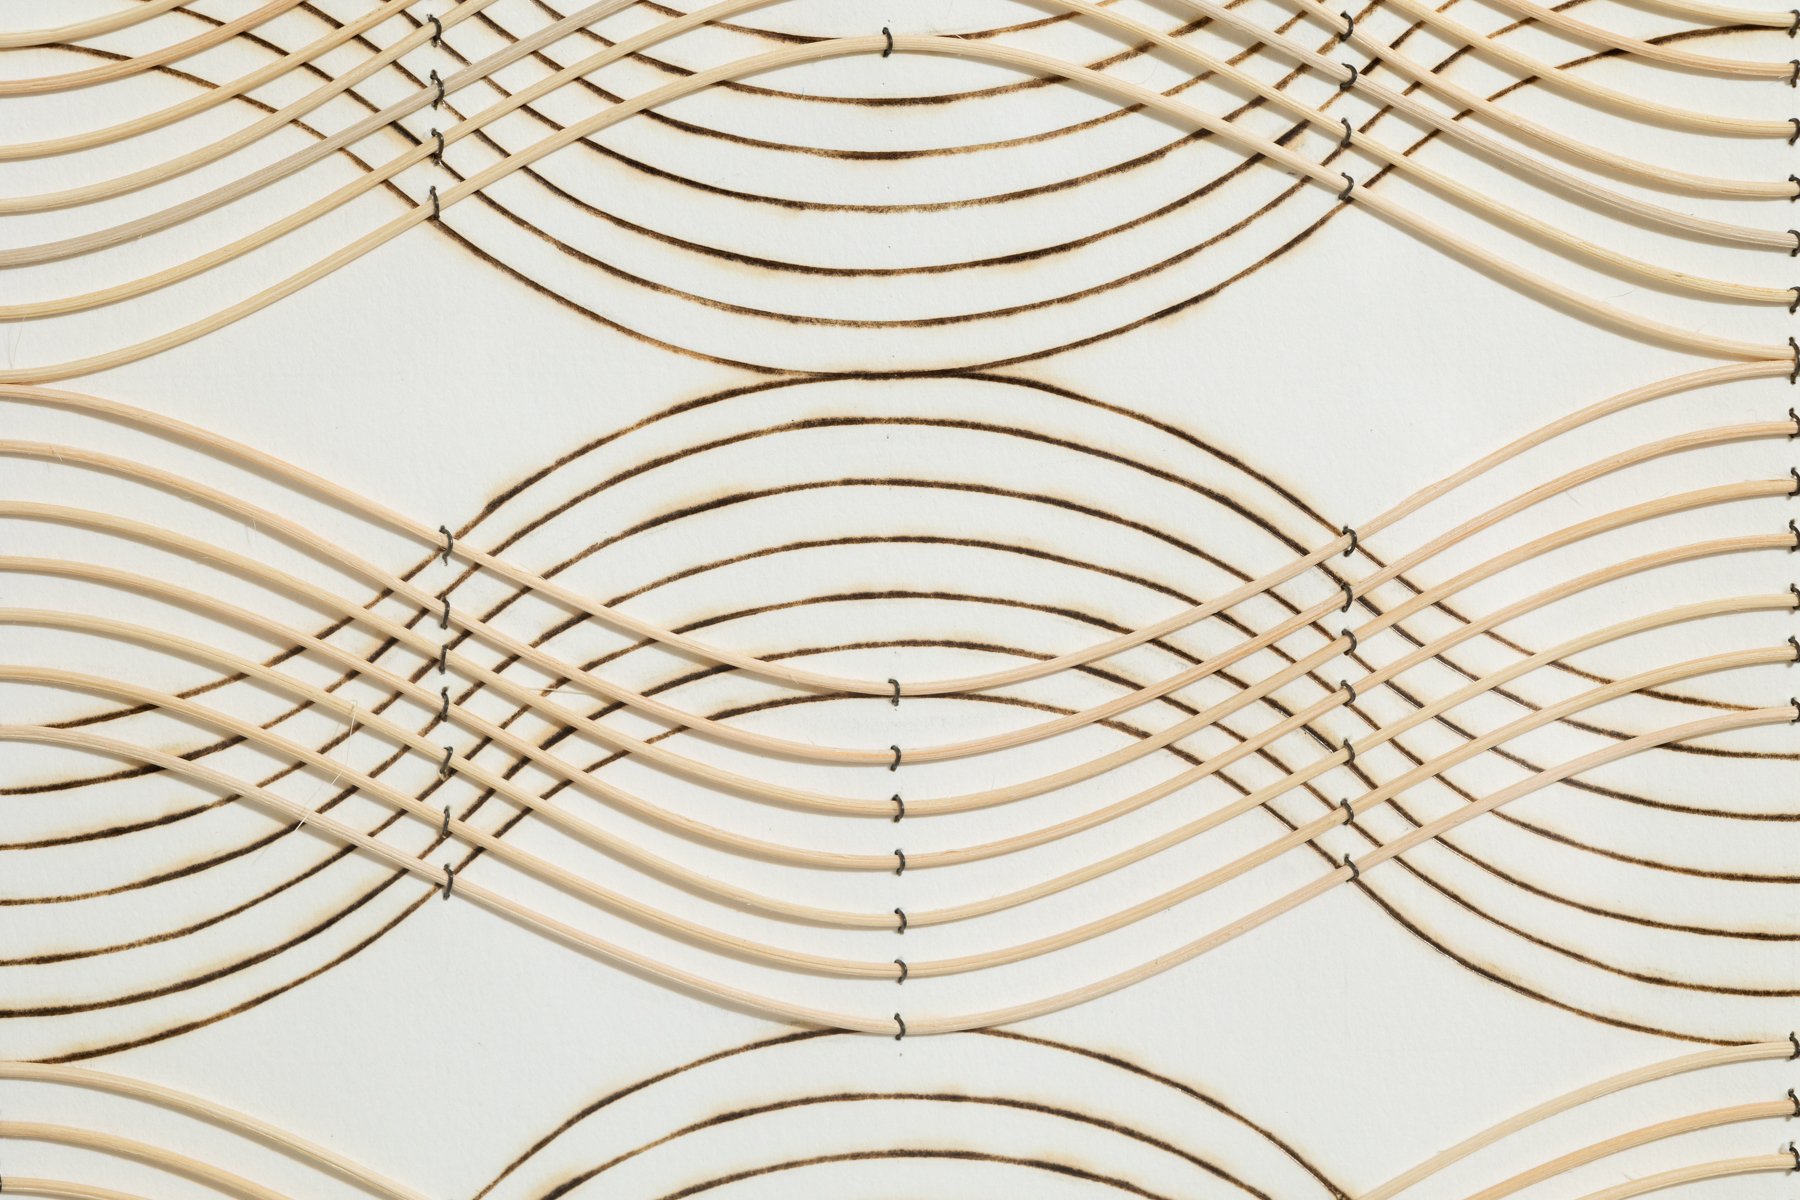 "Surface Tension" Geometric Art with Burned Lines and Dyed Reeds on Paper by Katrine Hildebrandt-Hussey @ Soapbox Arts Gallery, Burlington, VT 